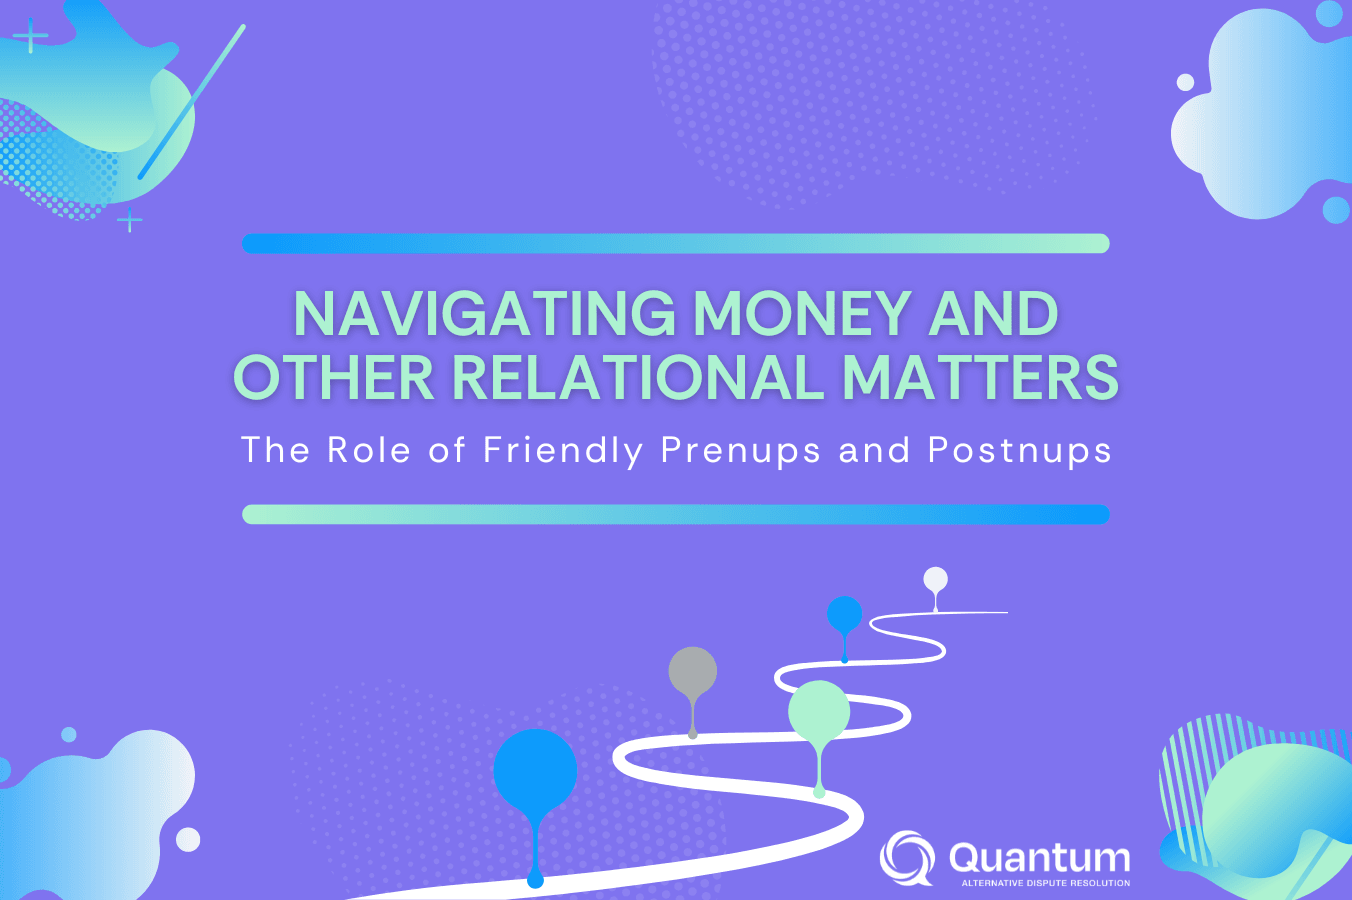 Navigating Money and Other Relational Matters: The Role of Friendly Prenups and Postnups